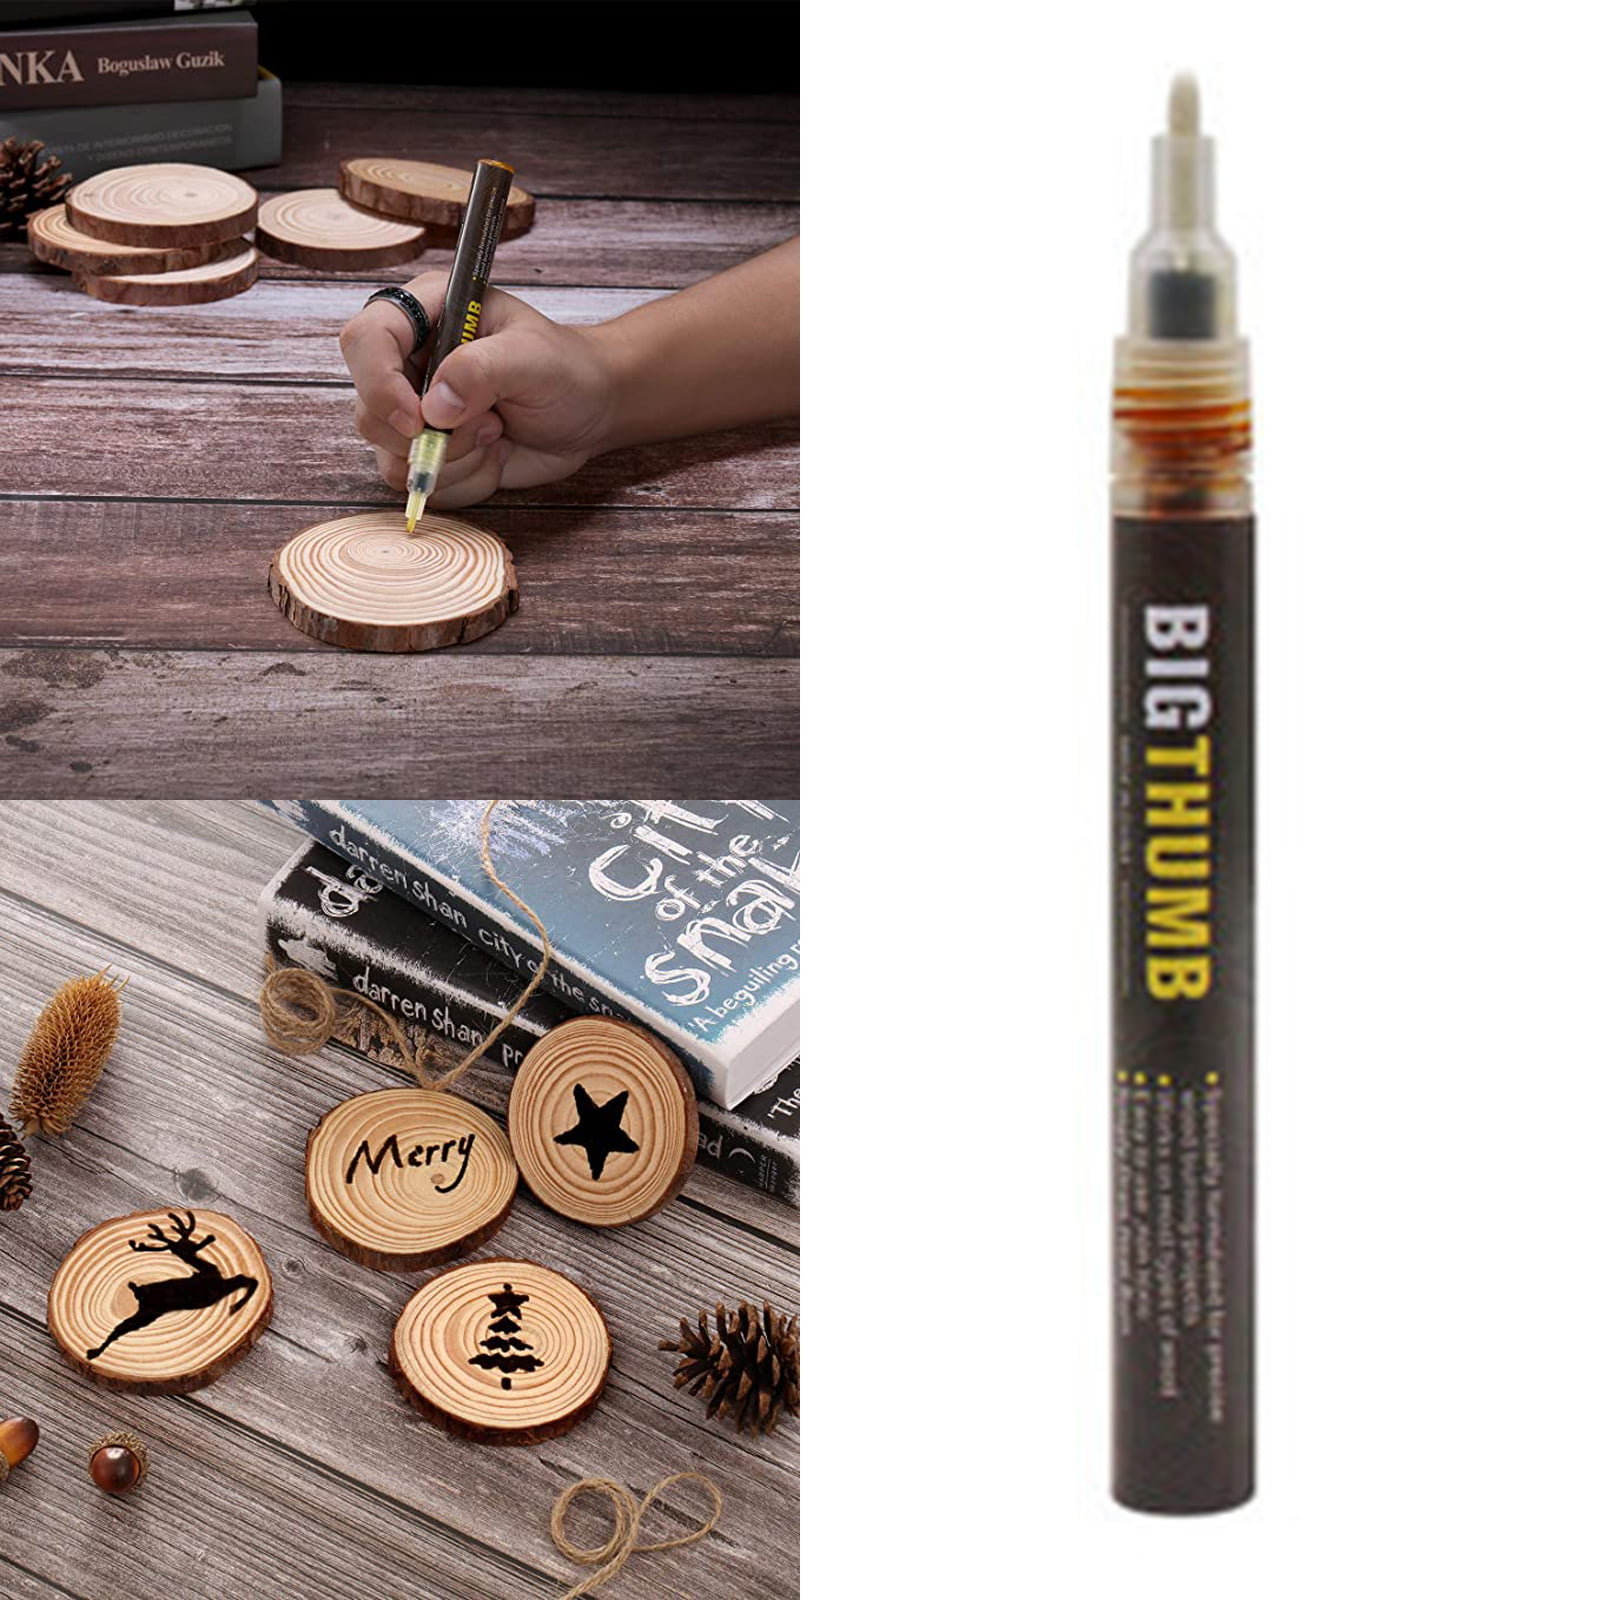 Scorch Marker Chemical Wood Burning Pen For Painting Diy Craft Woodworking  Art Painting Marker Pen Portable Office Tools - Art Markers - AliExpress